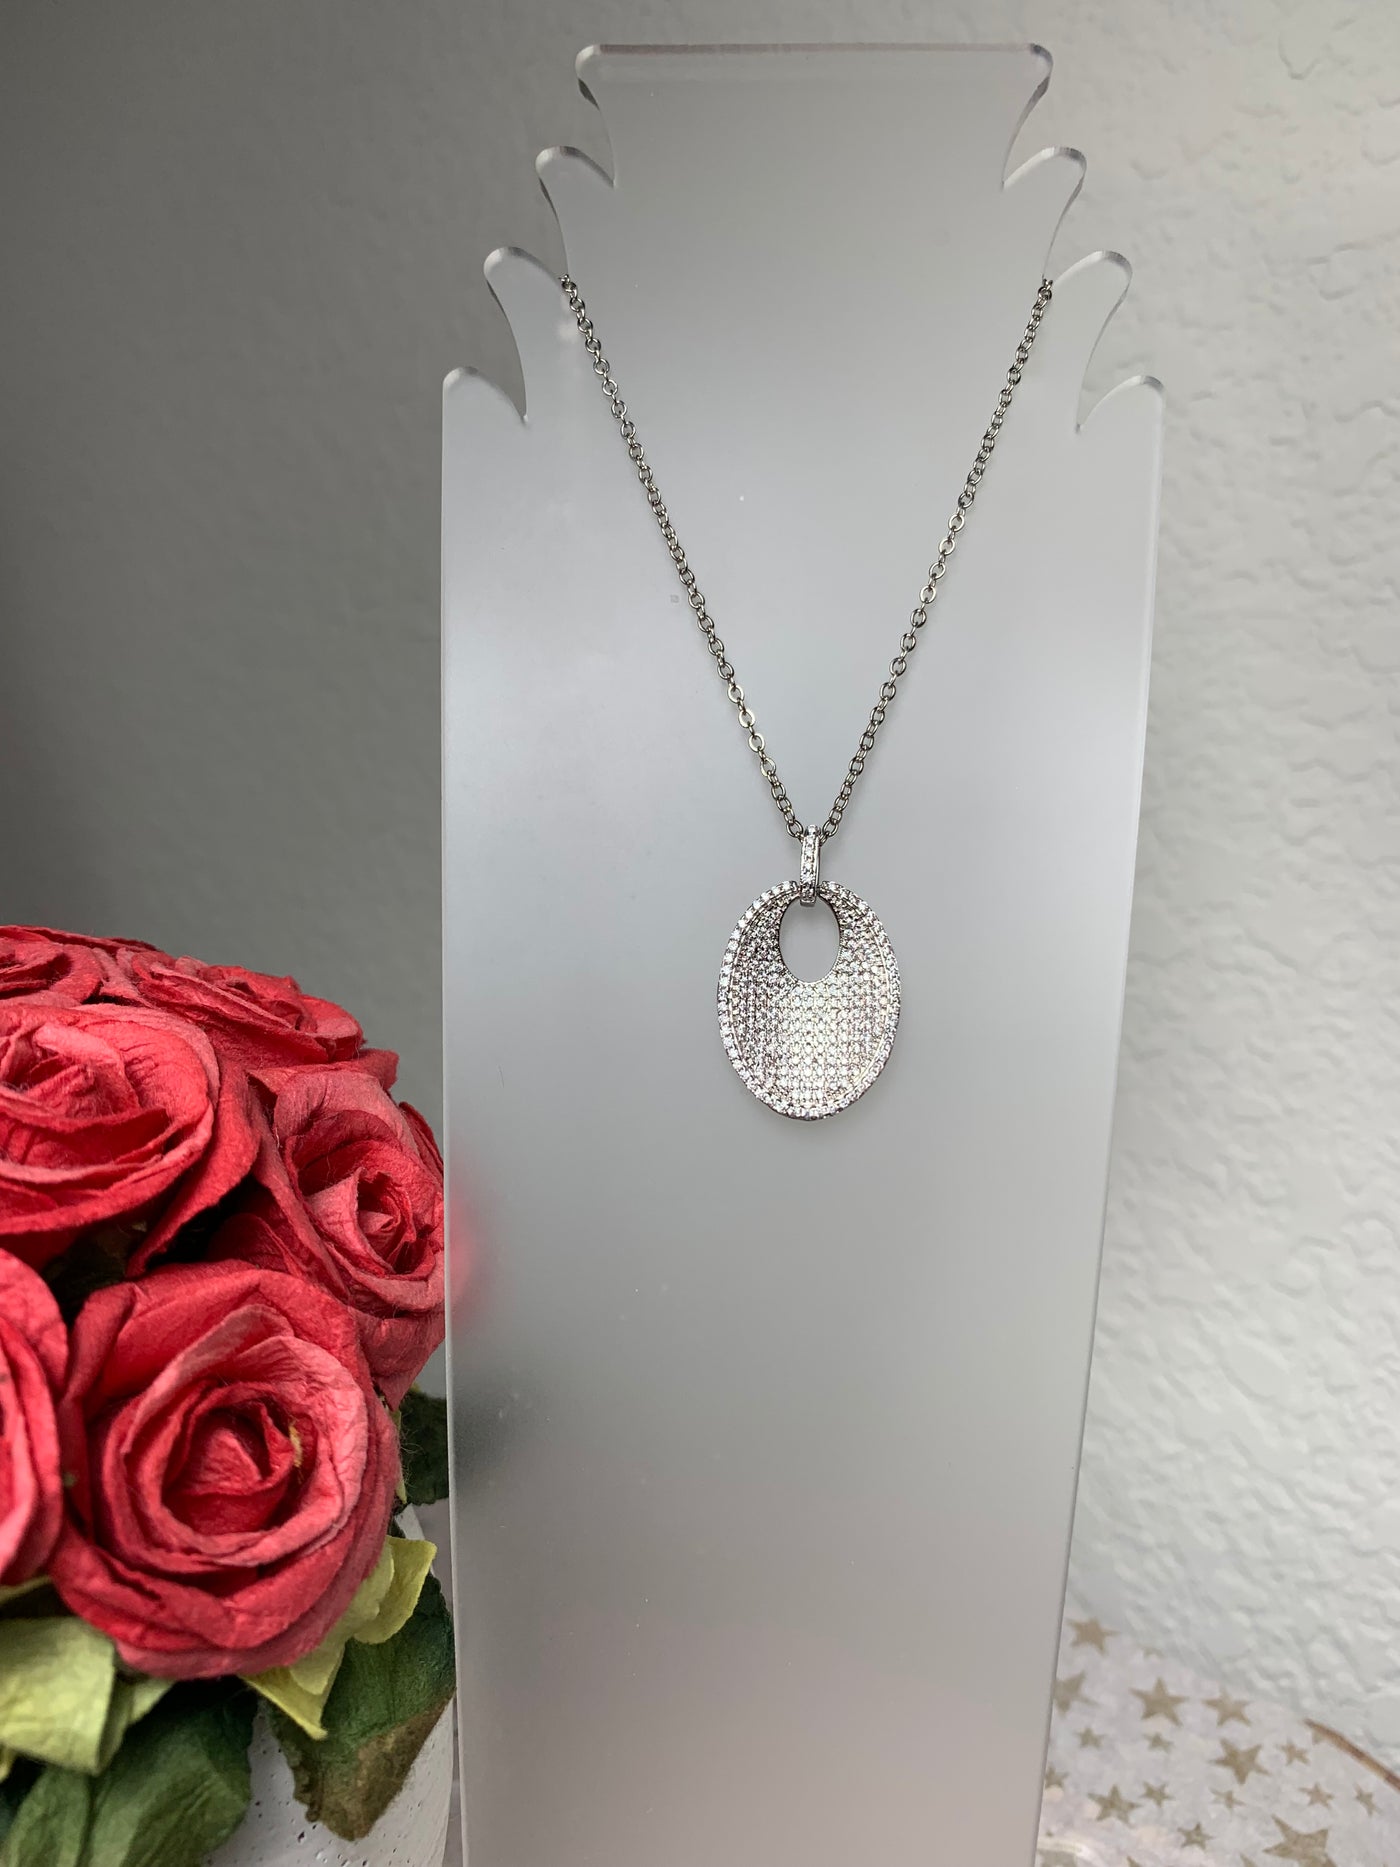 Concaved Oval Shape Pendant Decorated with Cubic Zirconium